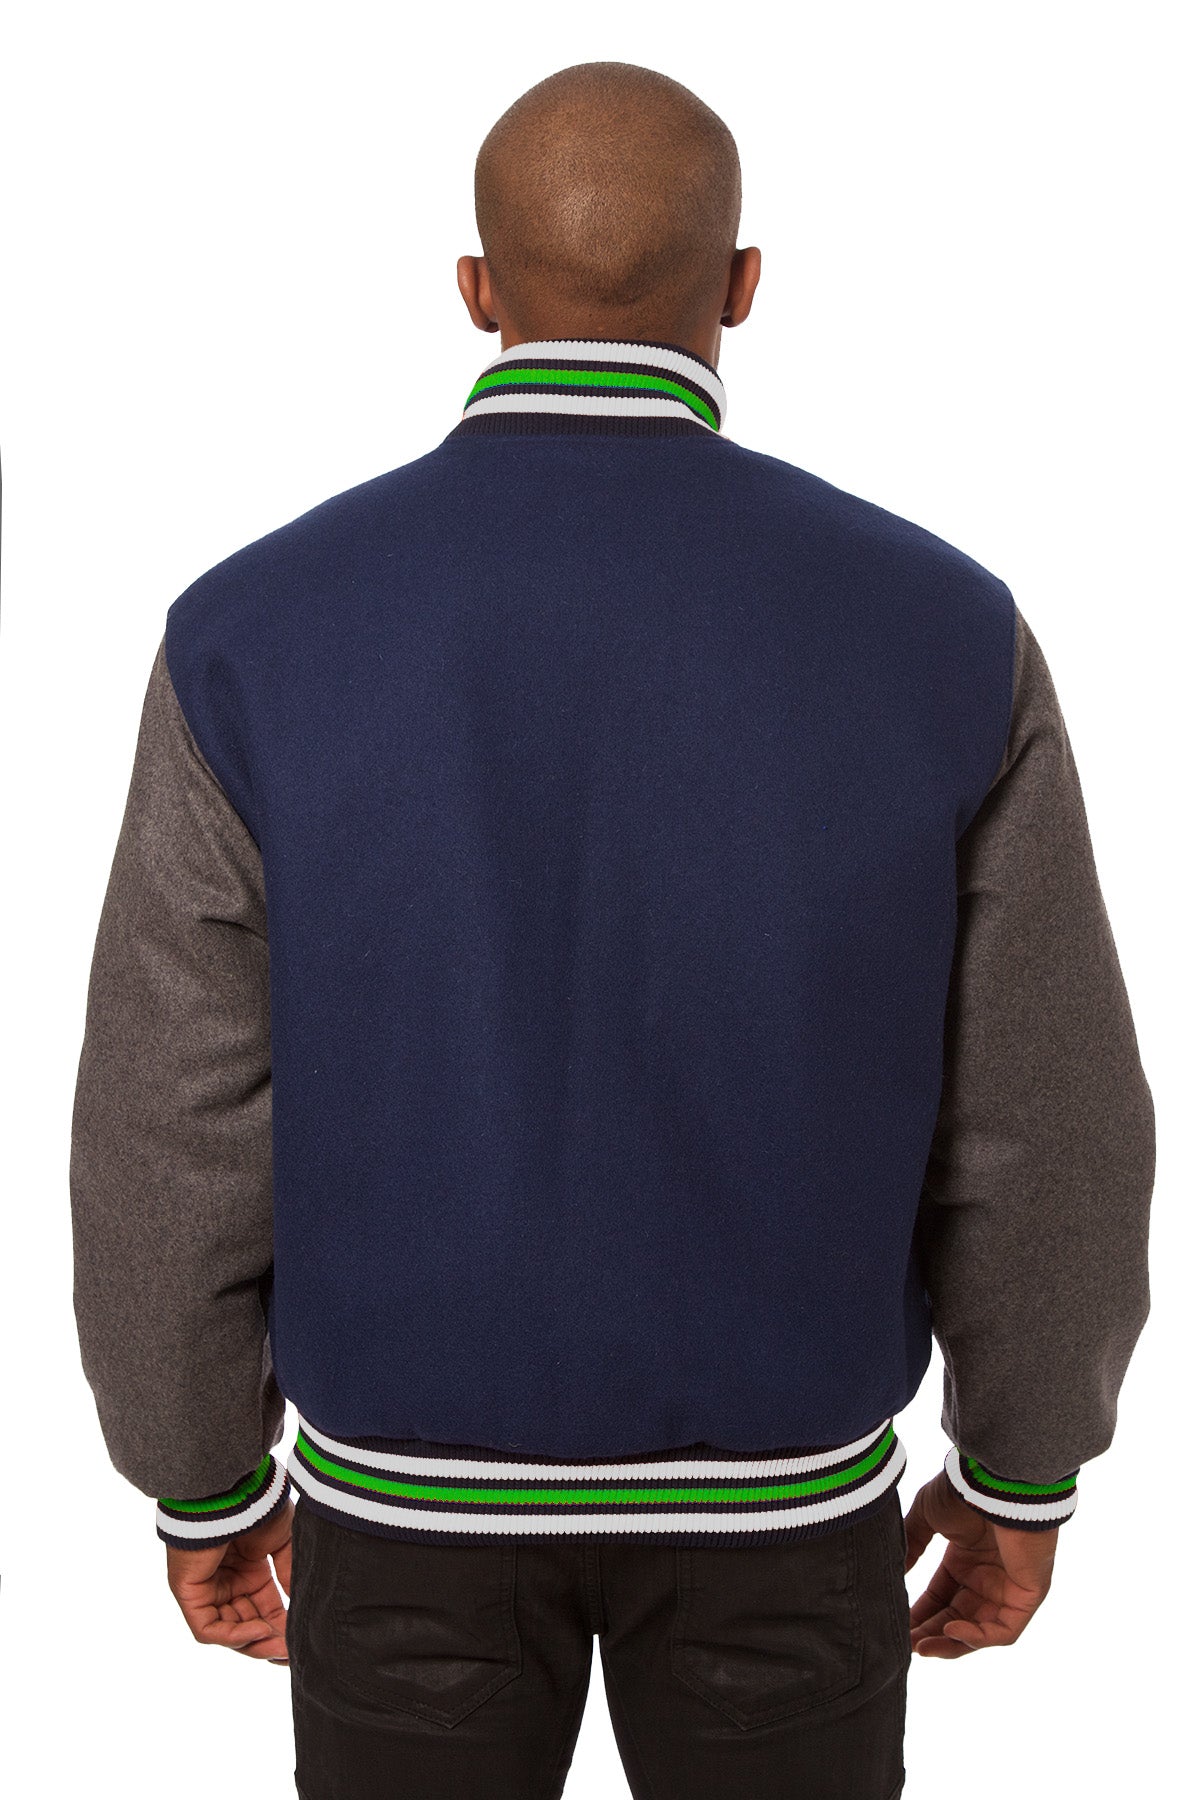 All-Wool Varsity Jacket with Navy Blue and Gray